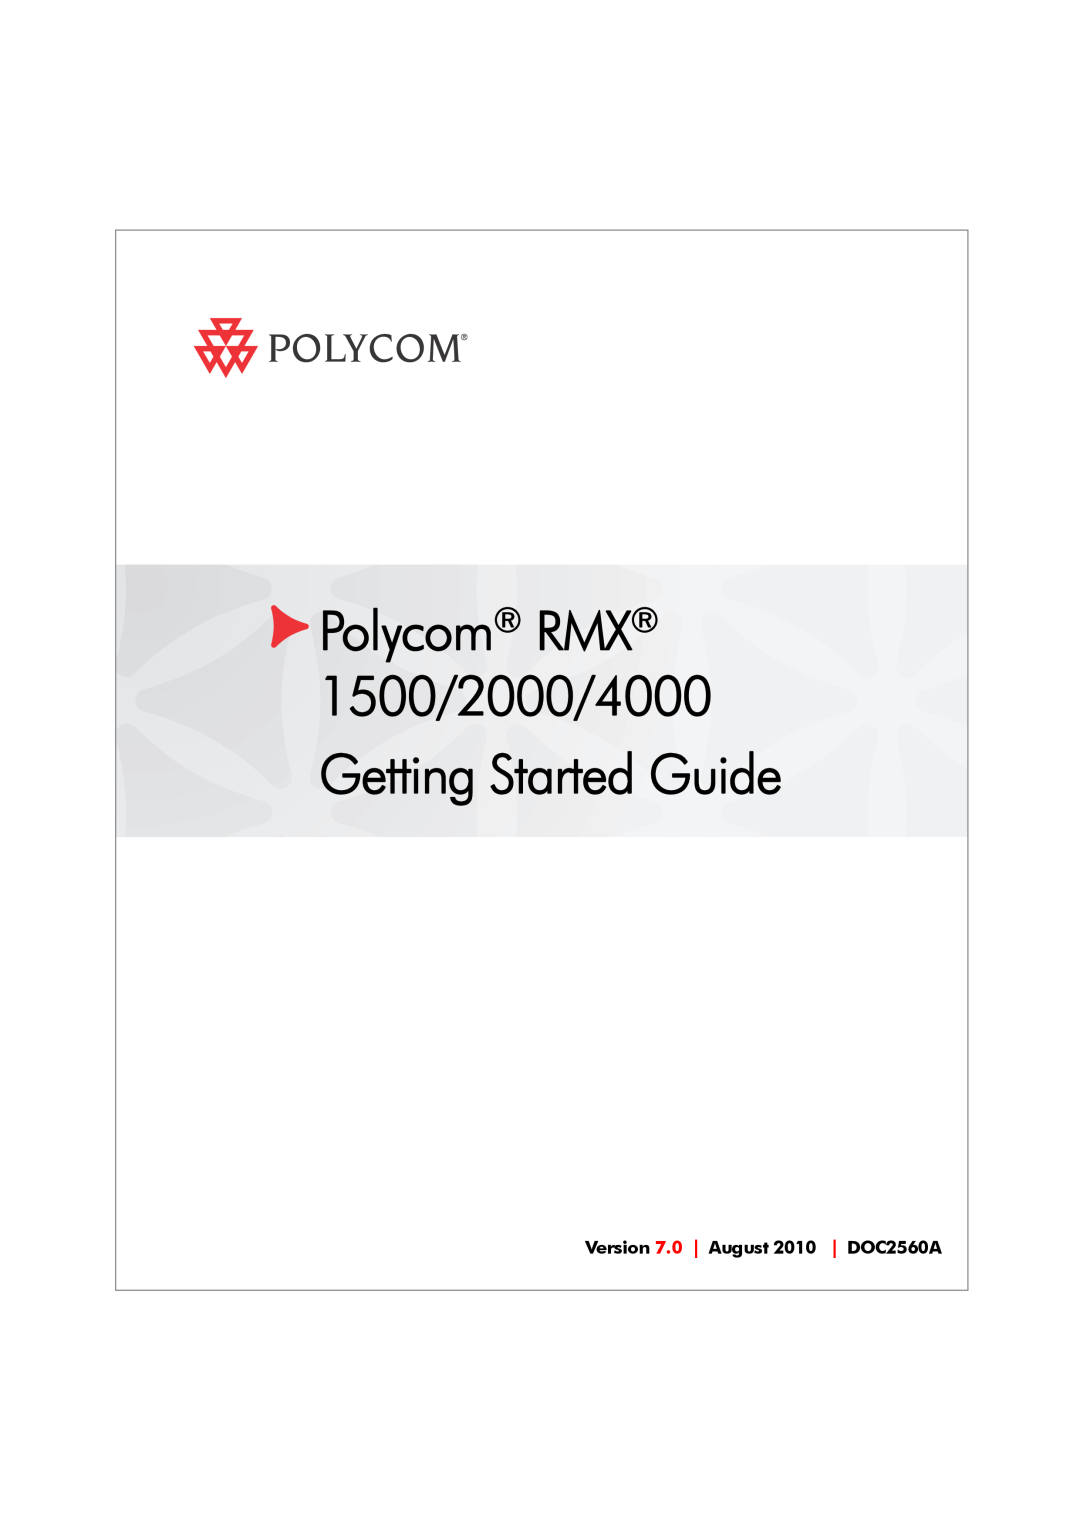 Polycom manual Polycom RMX 1500/2000/4000 Getting Started Guide, Version 7.0 August 2010 DOC2560A 